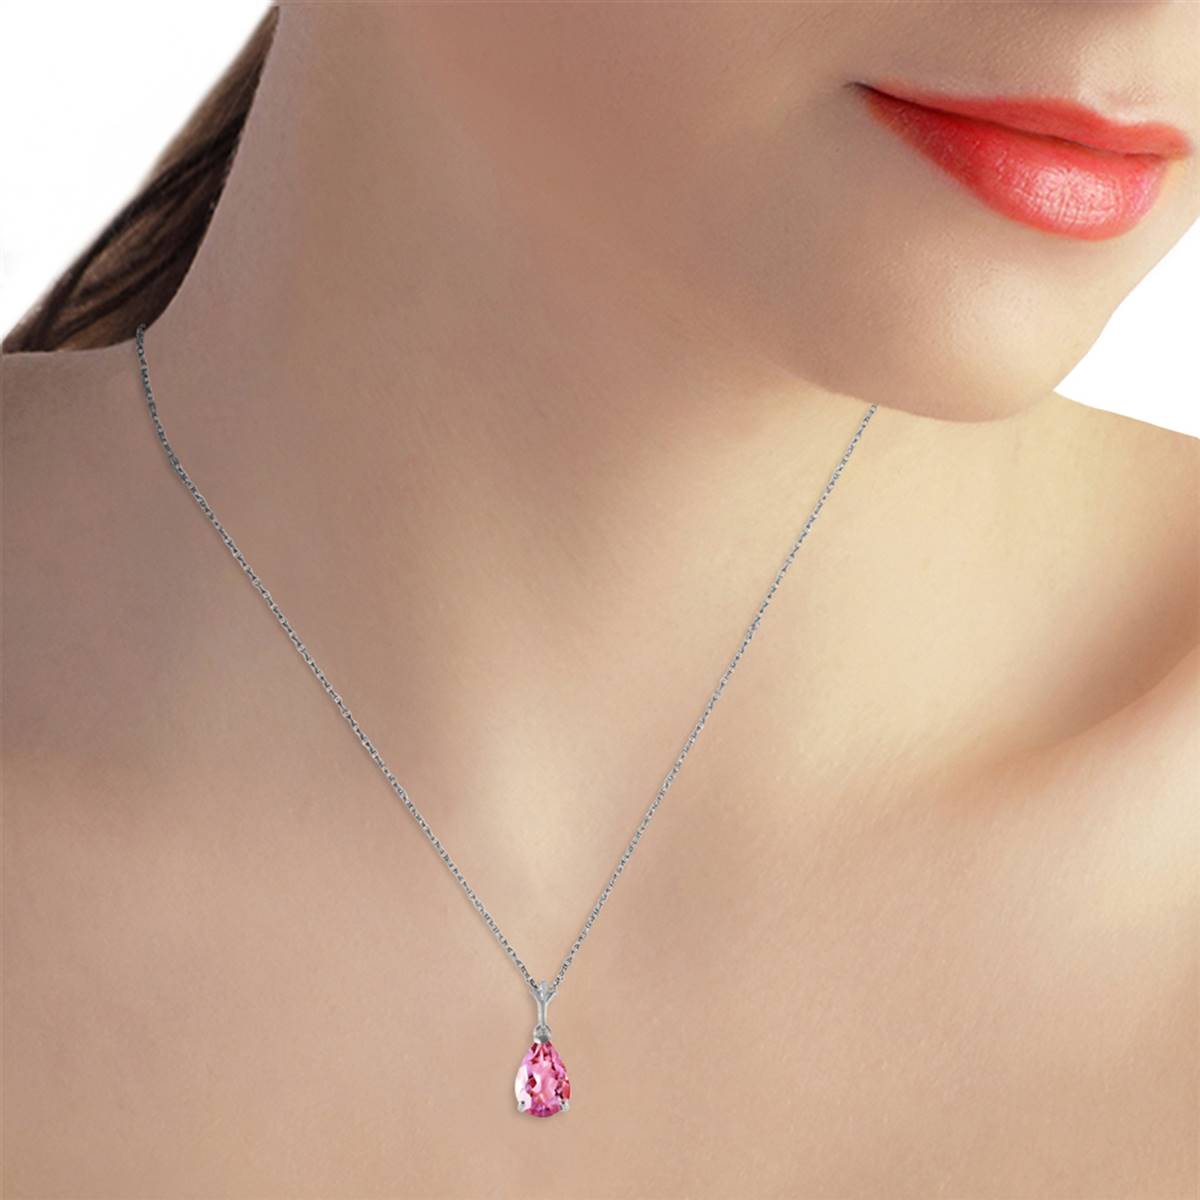 1.5 Carat 14K Solid White Gold Permit Yourself Pink Topaz Necklace